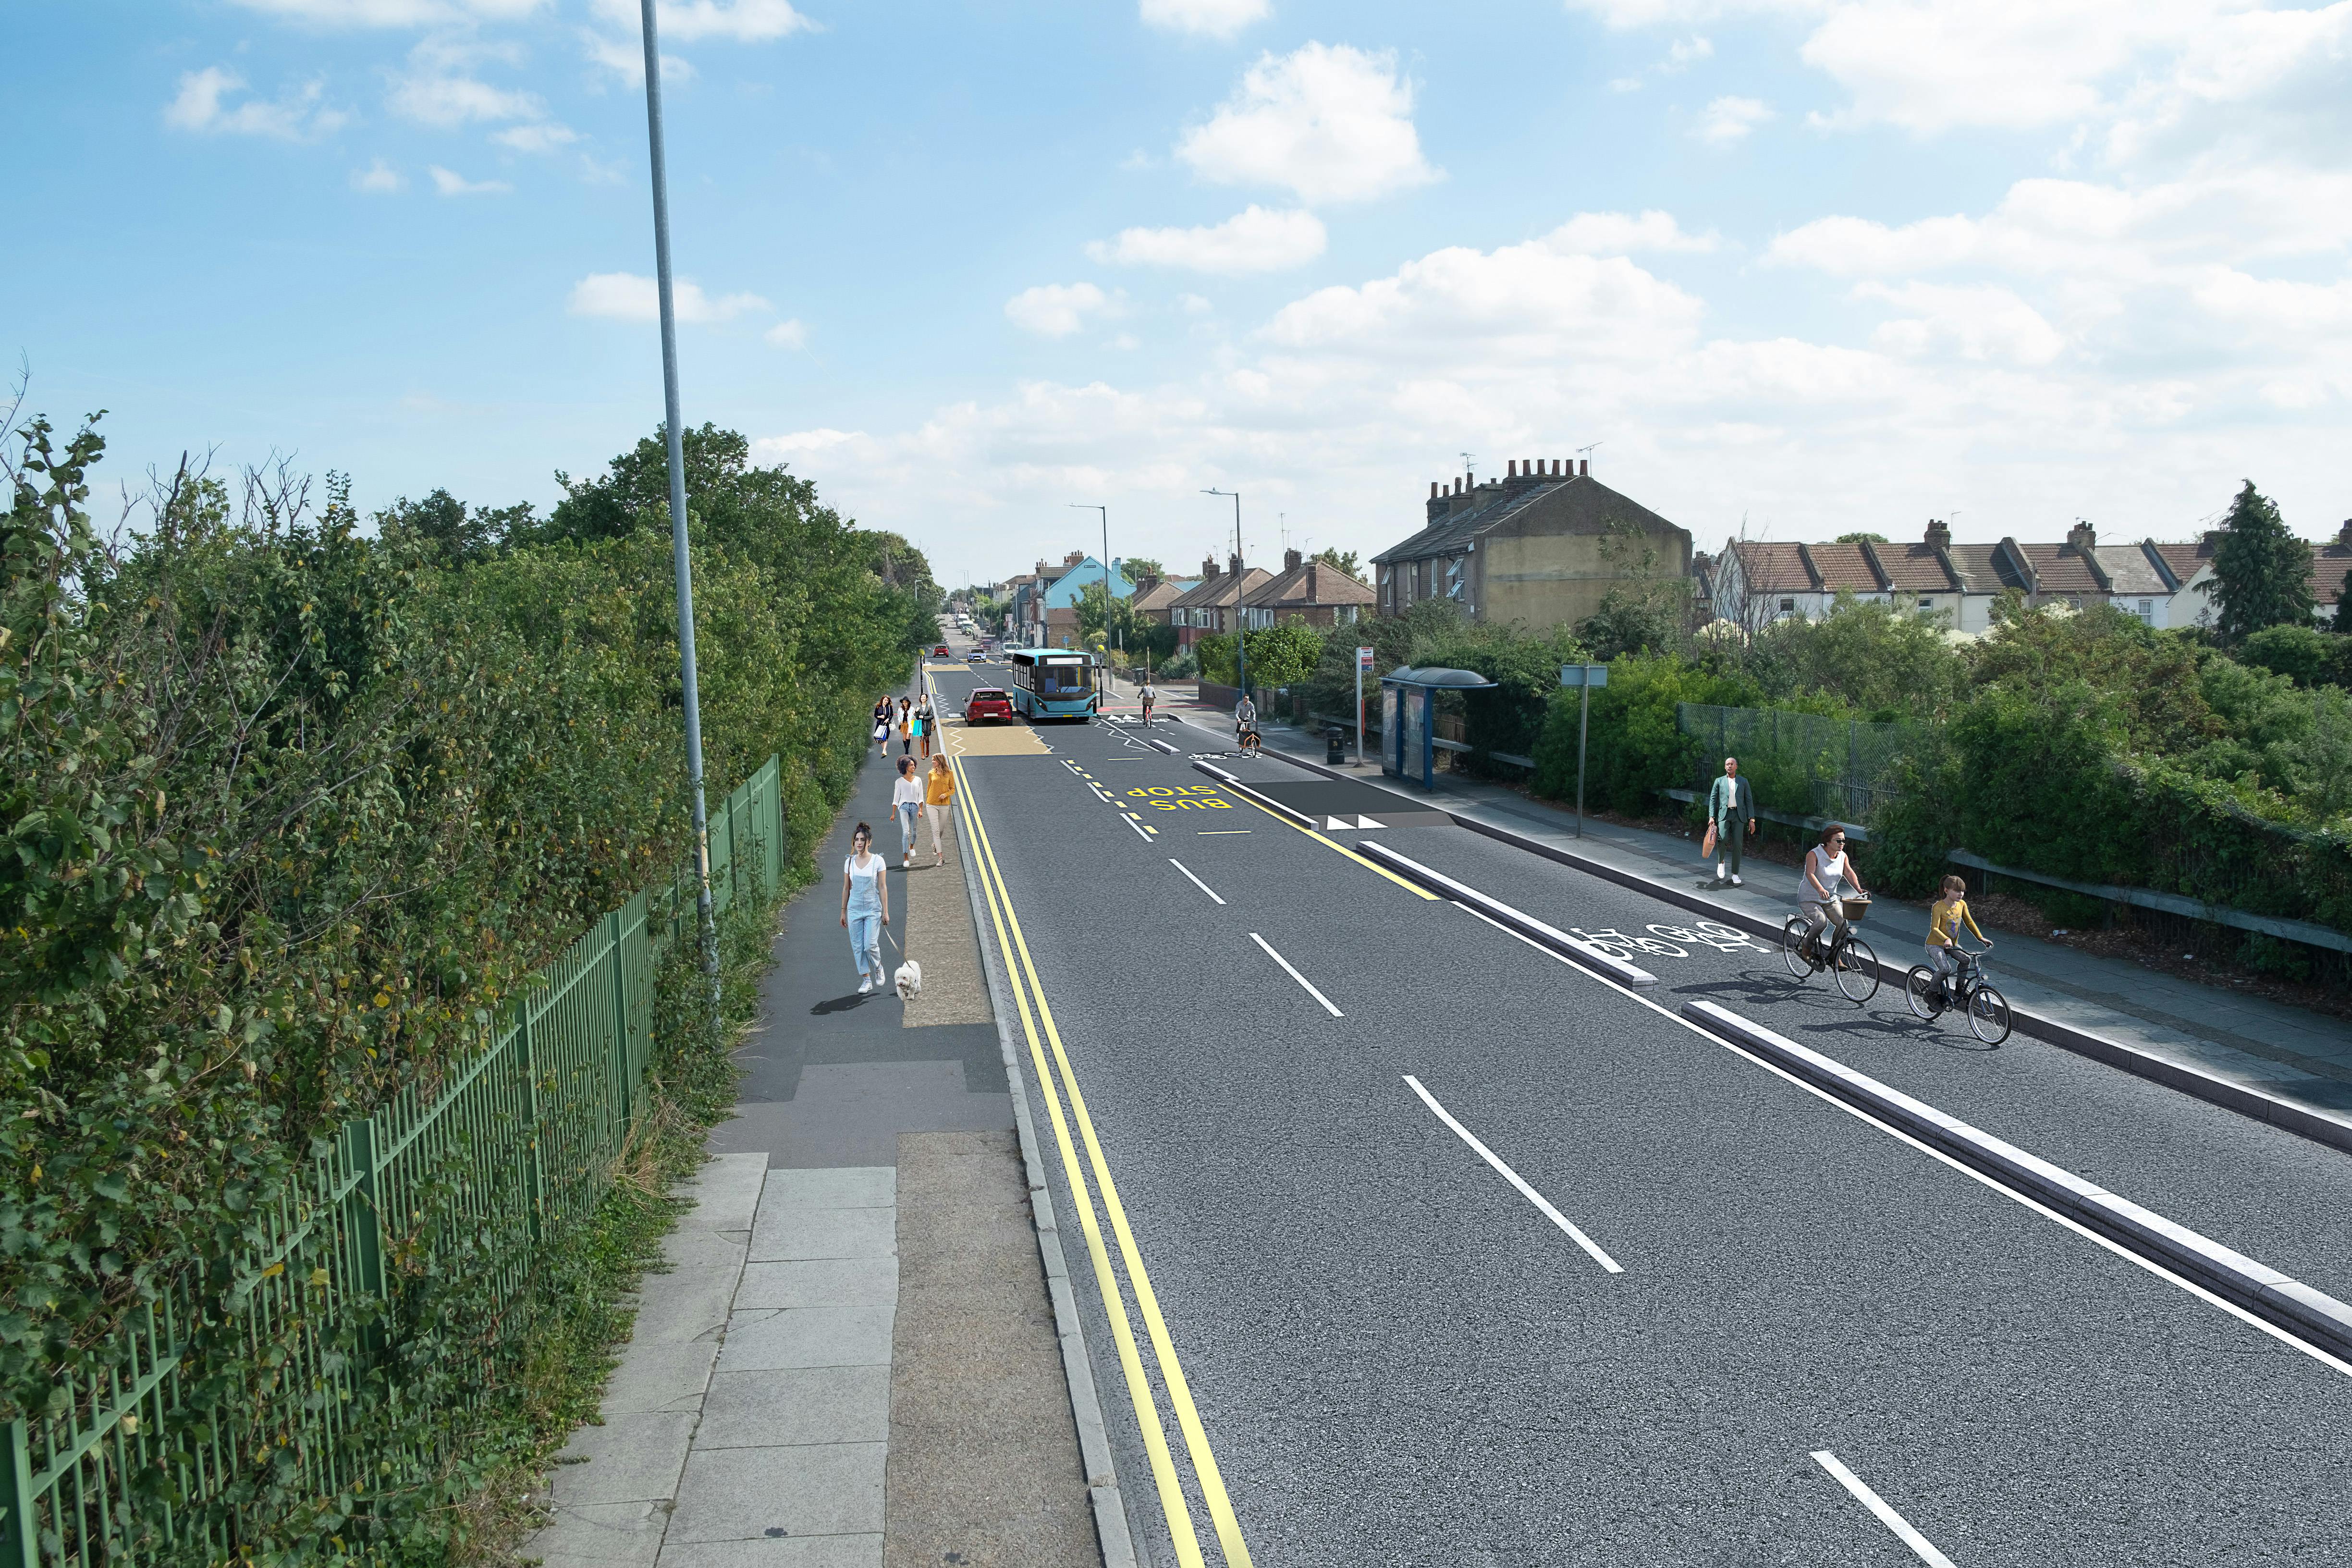  Visualisation of the proposals for the B2175 London Road looking east towards Rural Vale junction